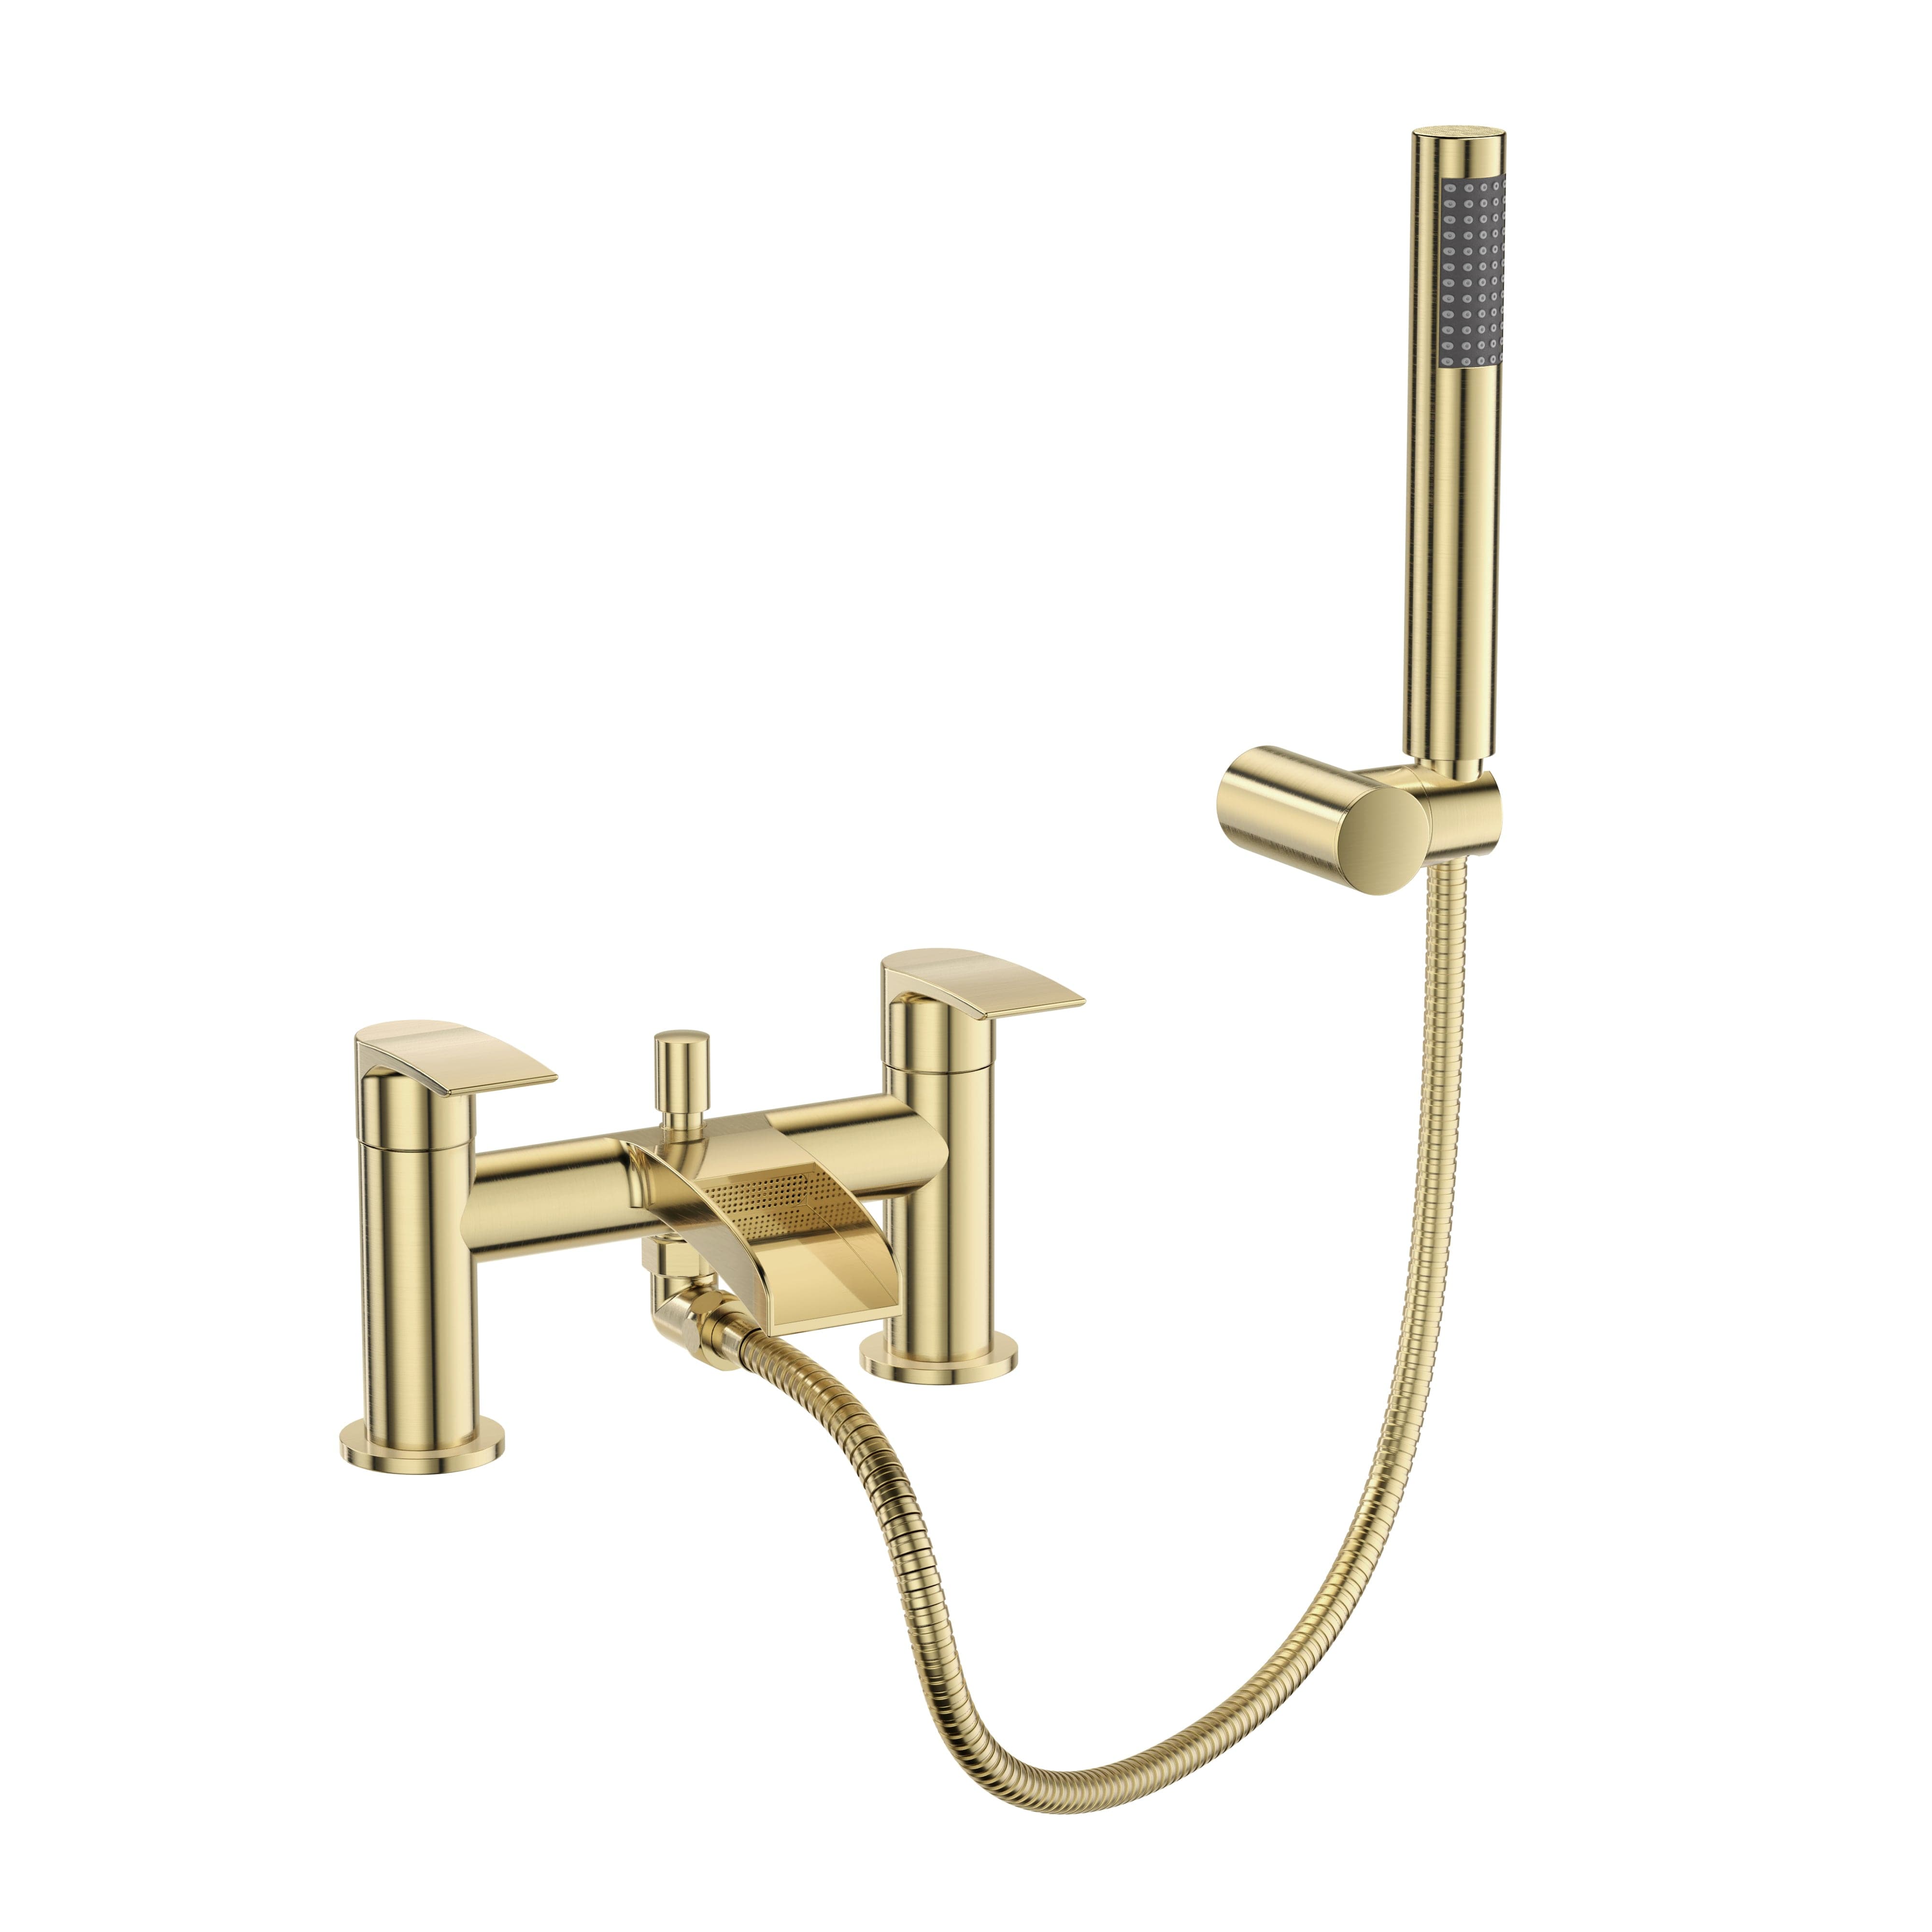 Symphony Round Waterfall Bath Shower Mixer Tap with Kit - Brushed Brass, elegant design, ideal for modern bathrooms. Buy now for quality and style!